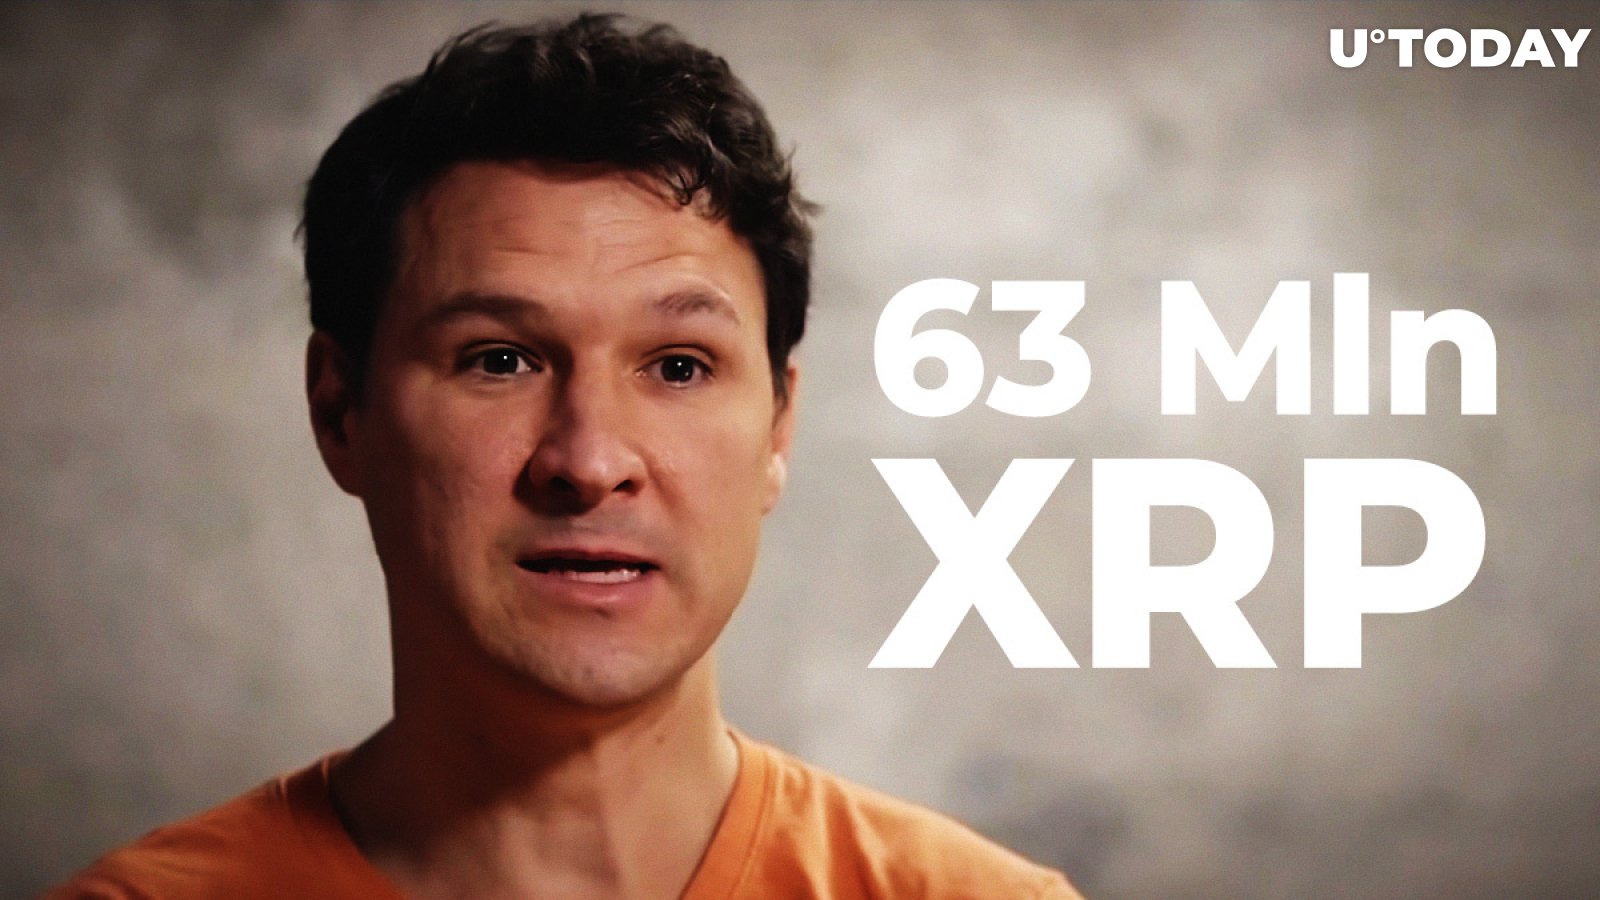 63 Mln XRP Moved Involving Jed McCaleb as XRP Whales Start Accumulating 